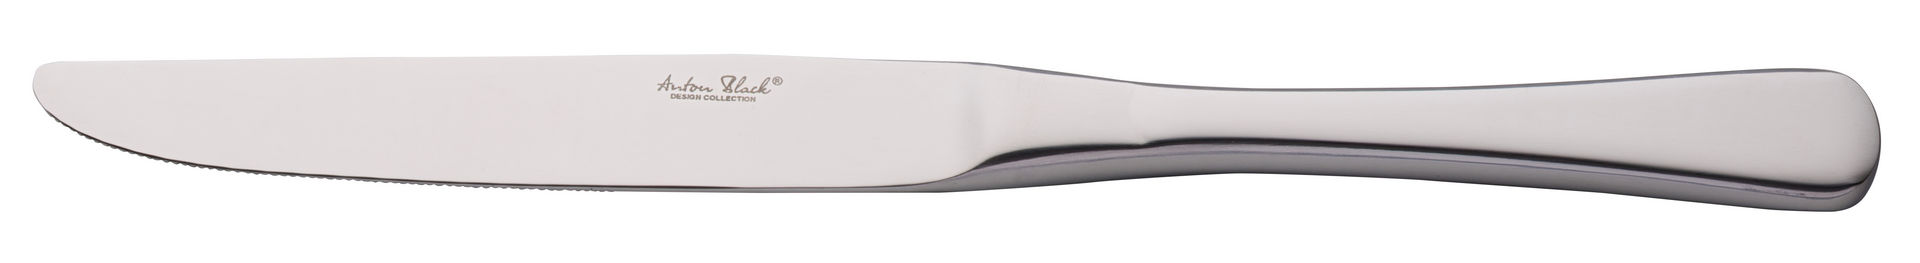 Mistral Table Knife - F13001-000000-B01012 (Pack of 12)